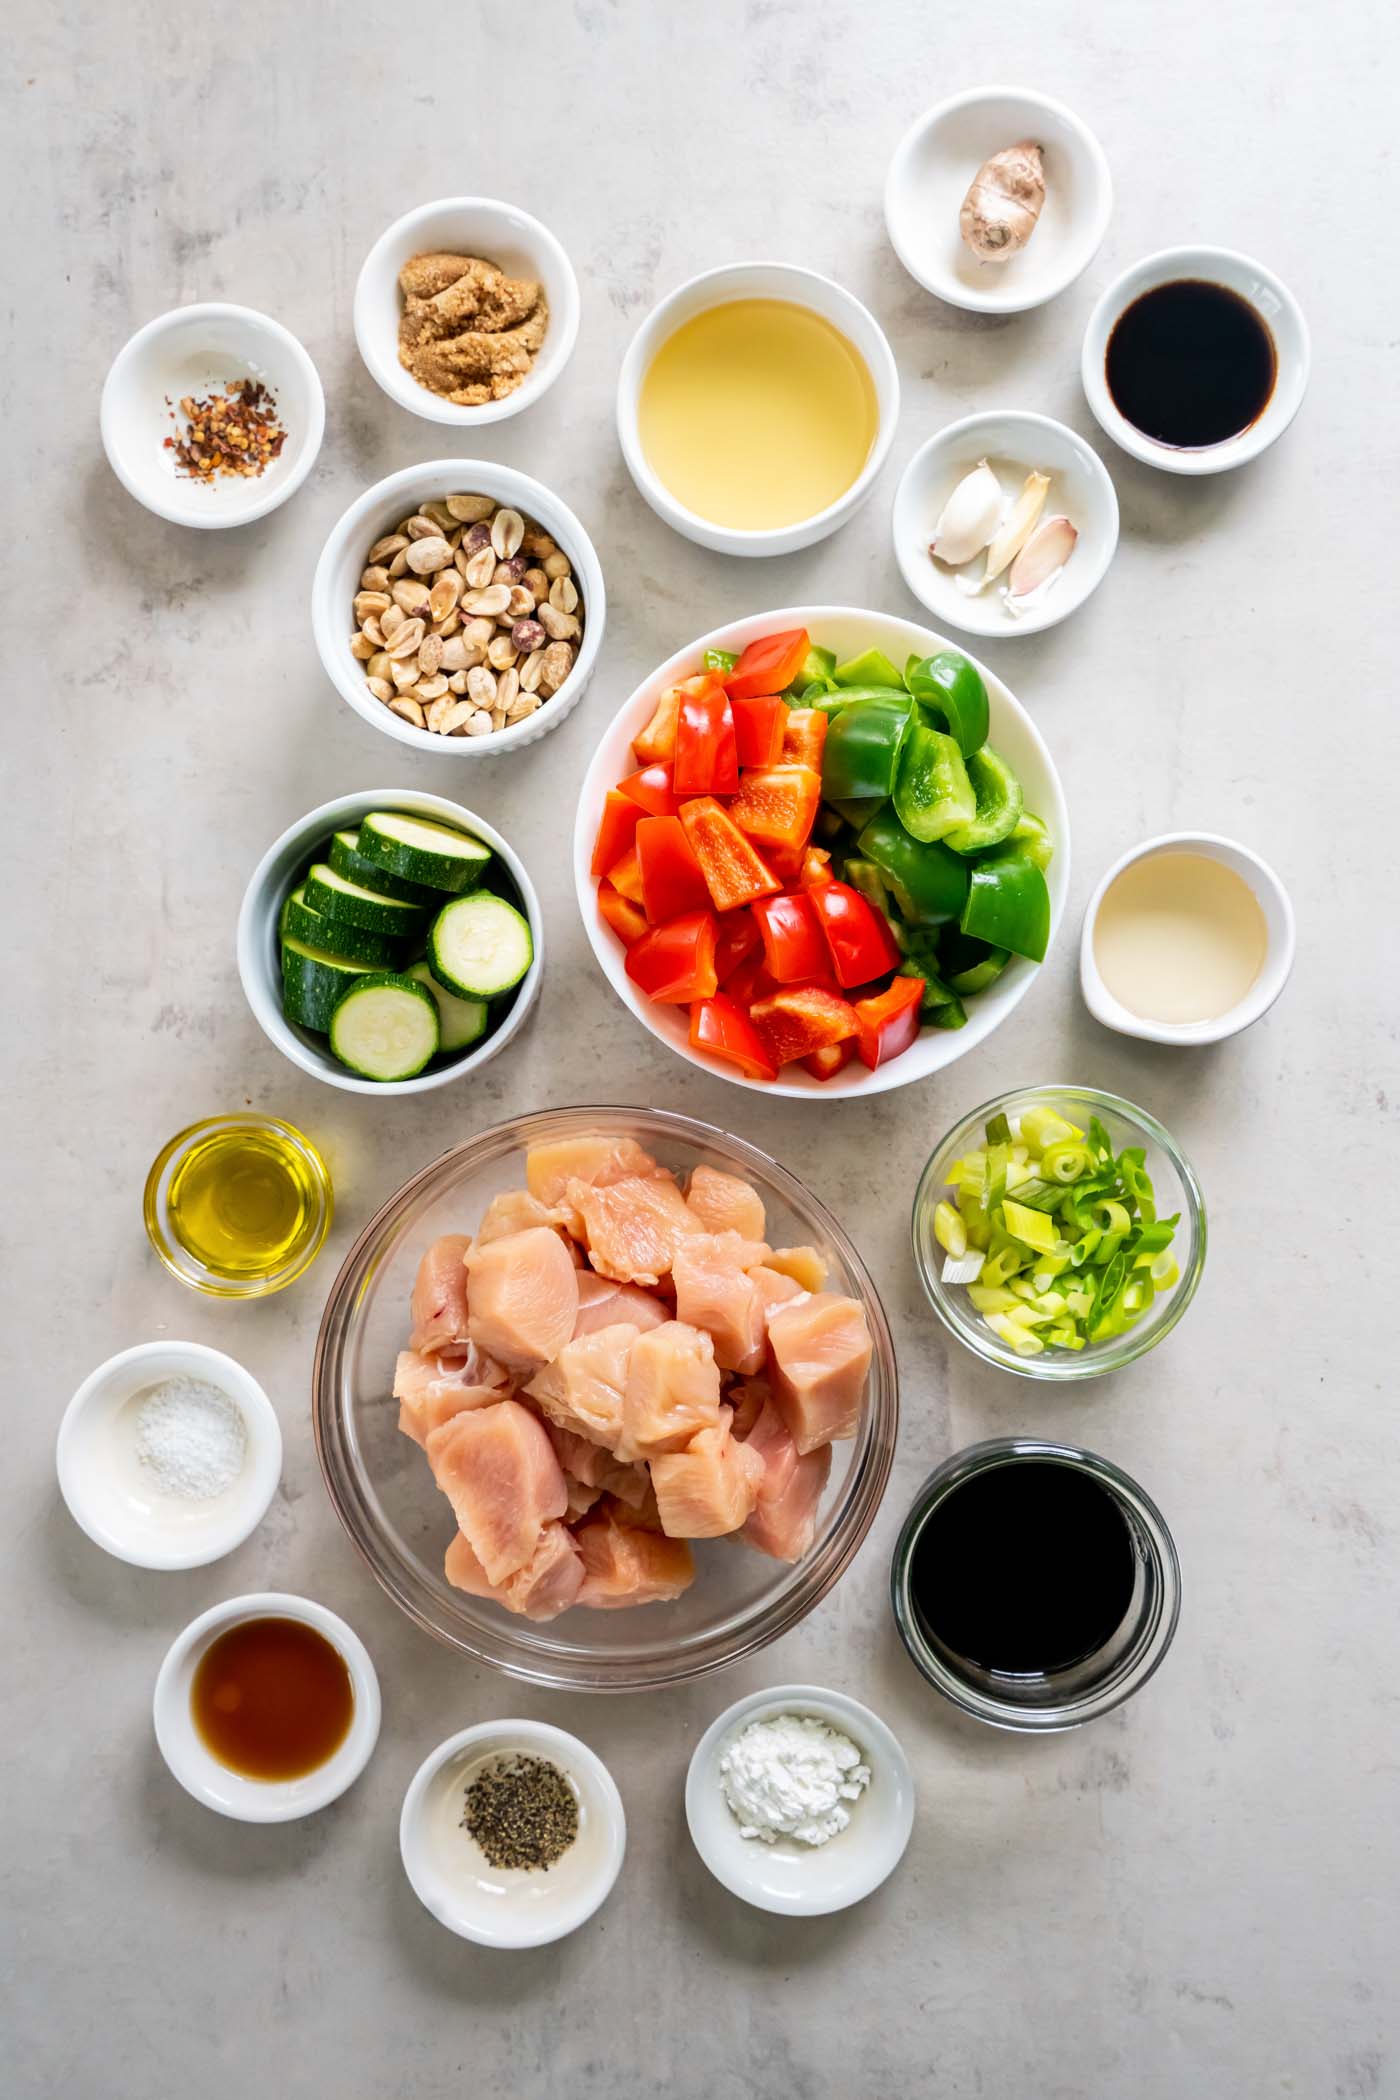 Ingredients for kung pao chicken recipe.